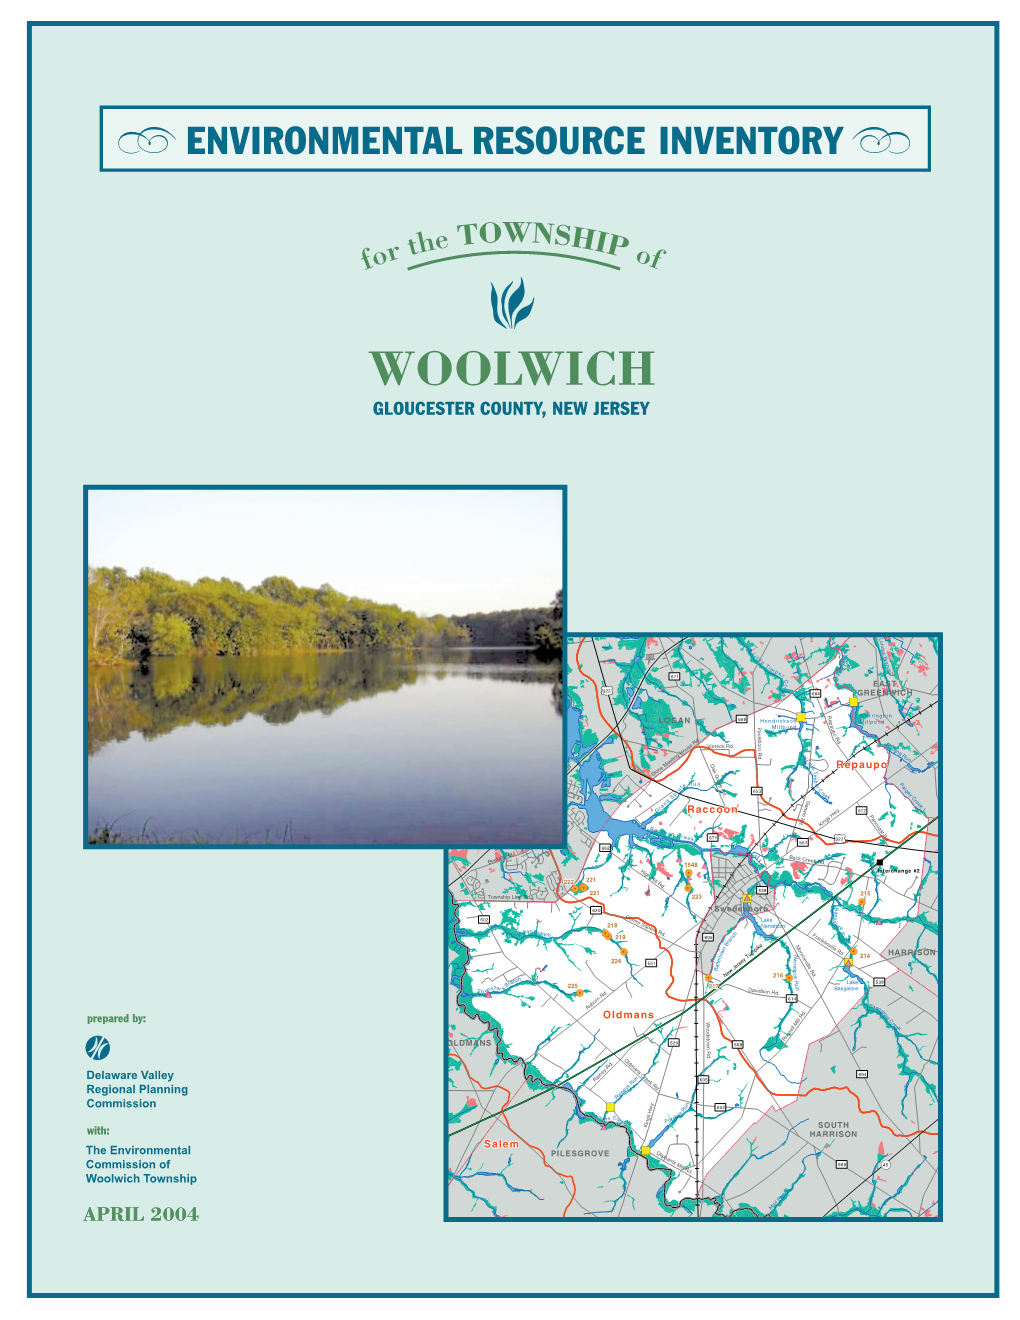 Environmental Resource Inventory for Woolwich Township, Including the Woolwich Master Plan Adopted in November 2003, Along with a Number of Reference Works